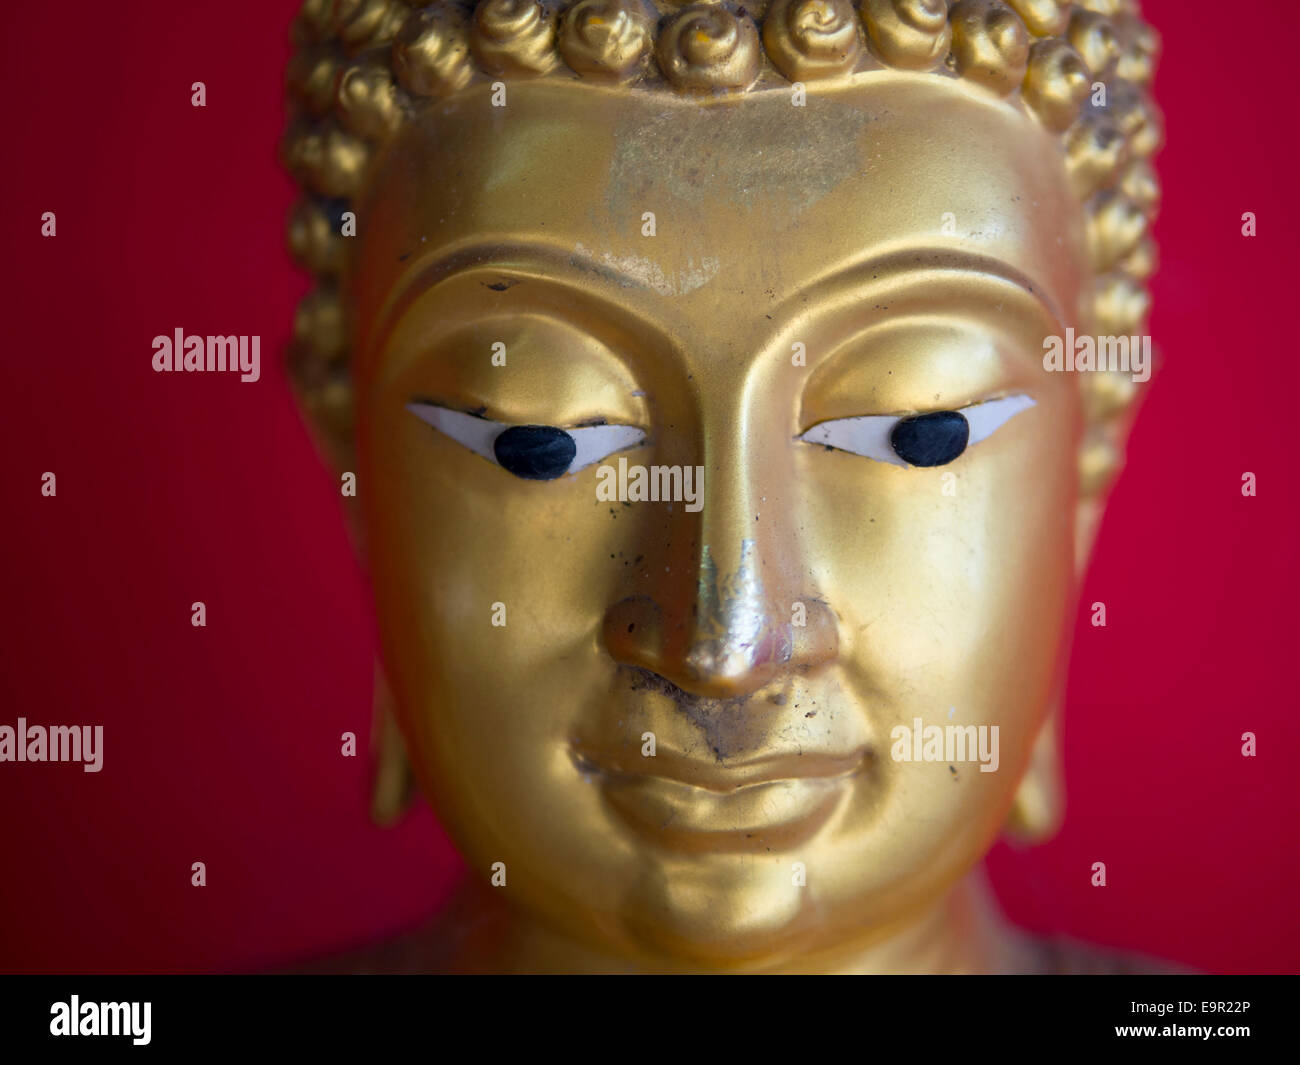 Head of old Buddha statue over vibrant red background. Stock Photo